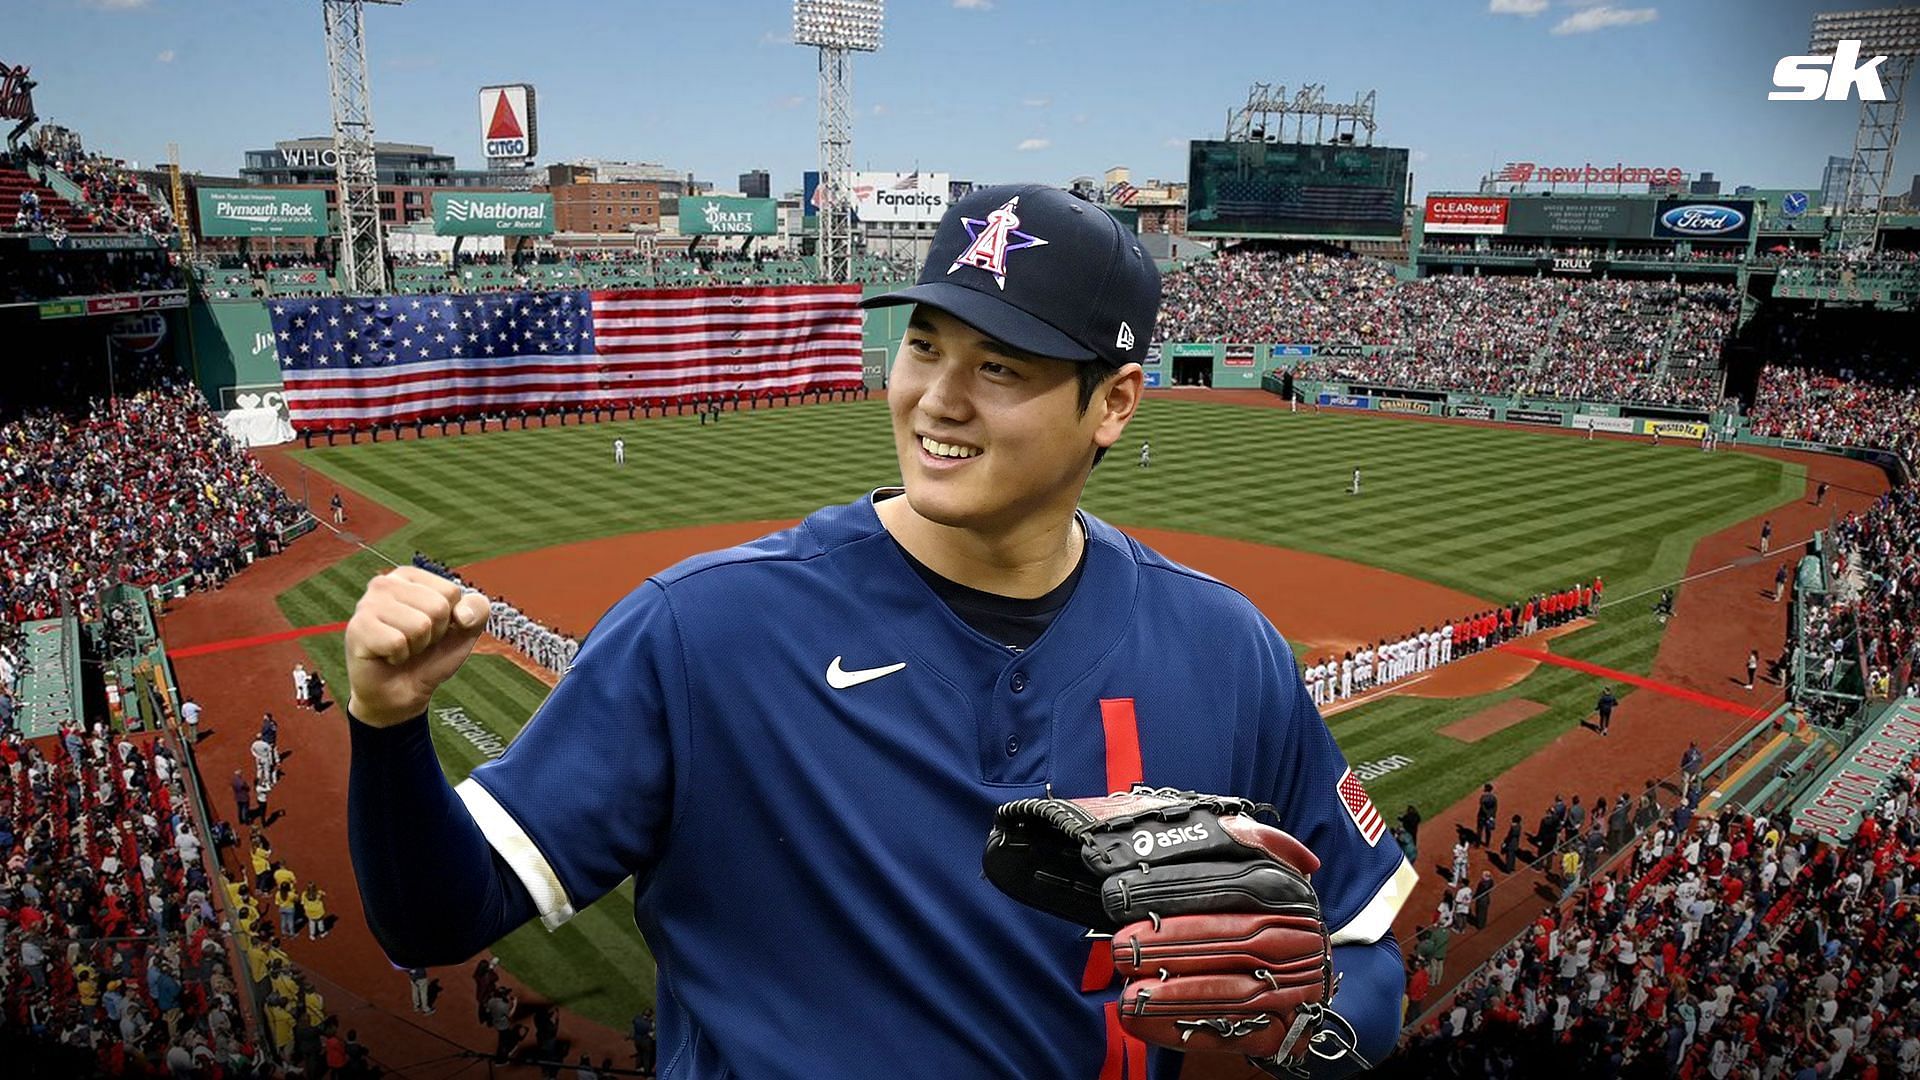 Japanese Yankees fans make pitch for Shohei Ohtani, who could be New York  'rock star' 